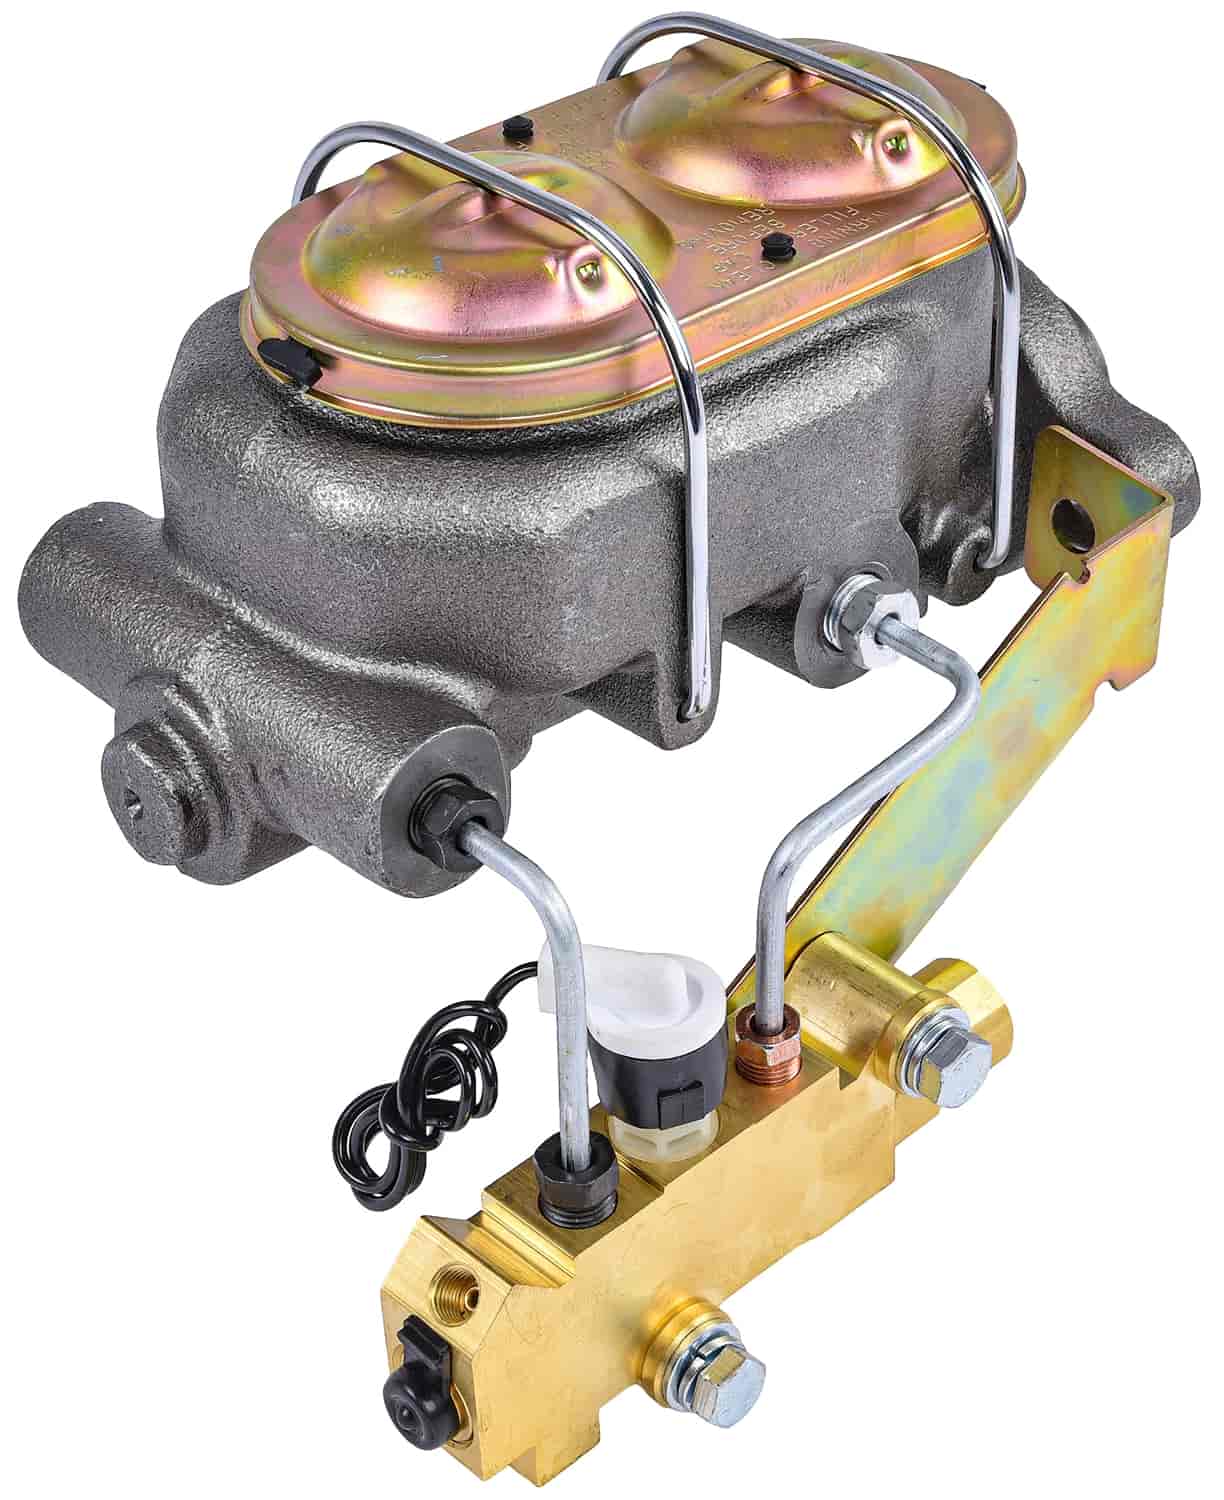 Brake Master Cylinder with Dual Reservoir & Proportioning Valve Kit for Disc/Drum Applications [GM Universal Mounting]